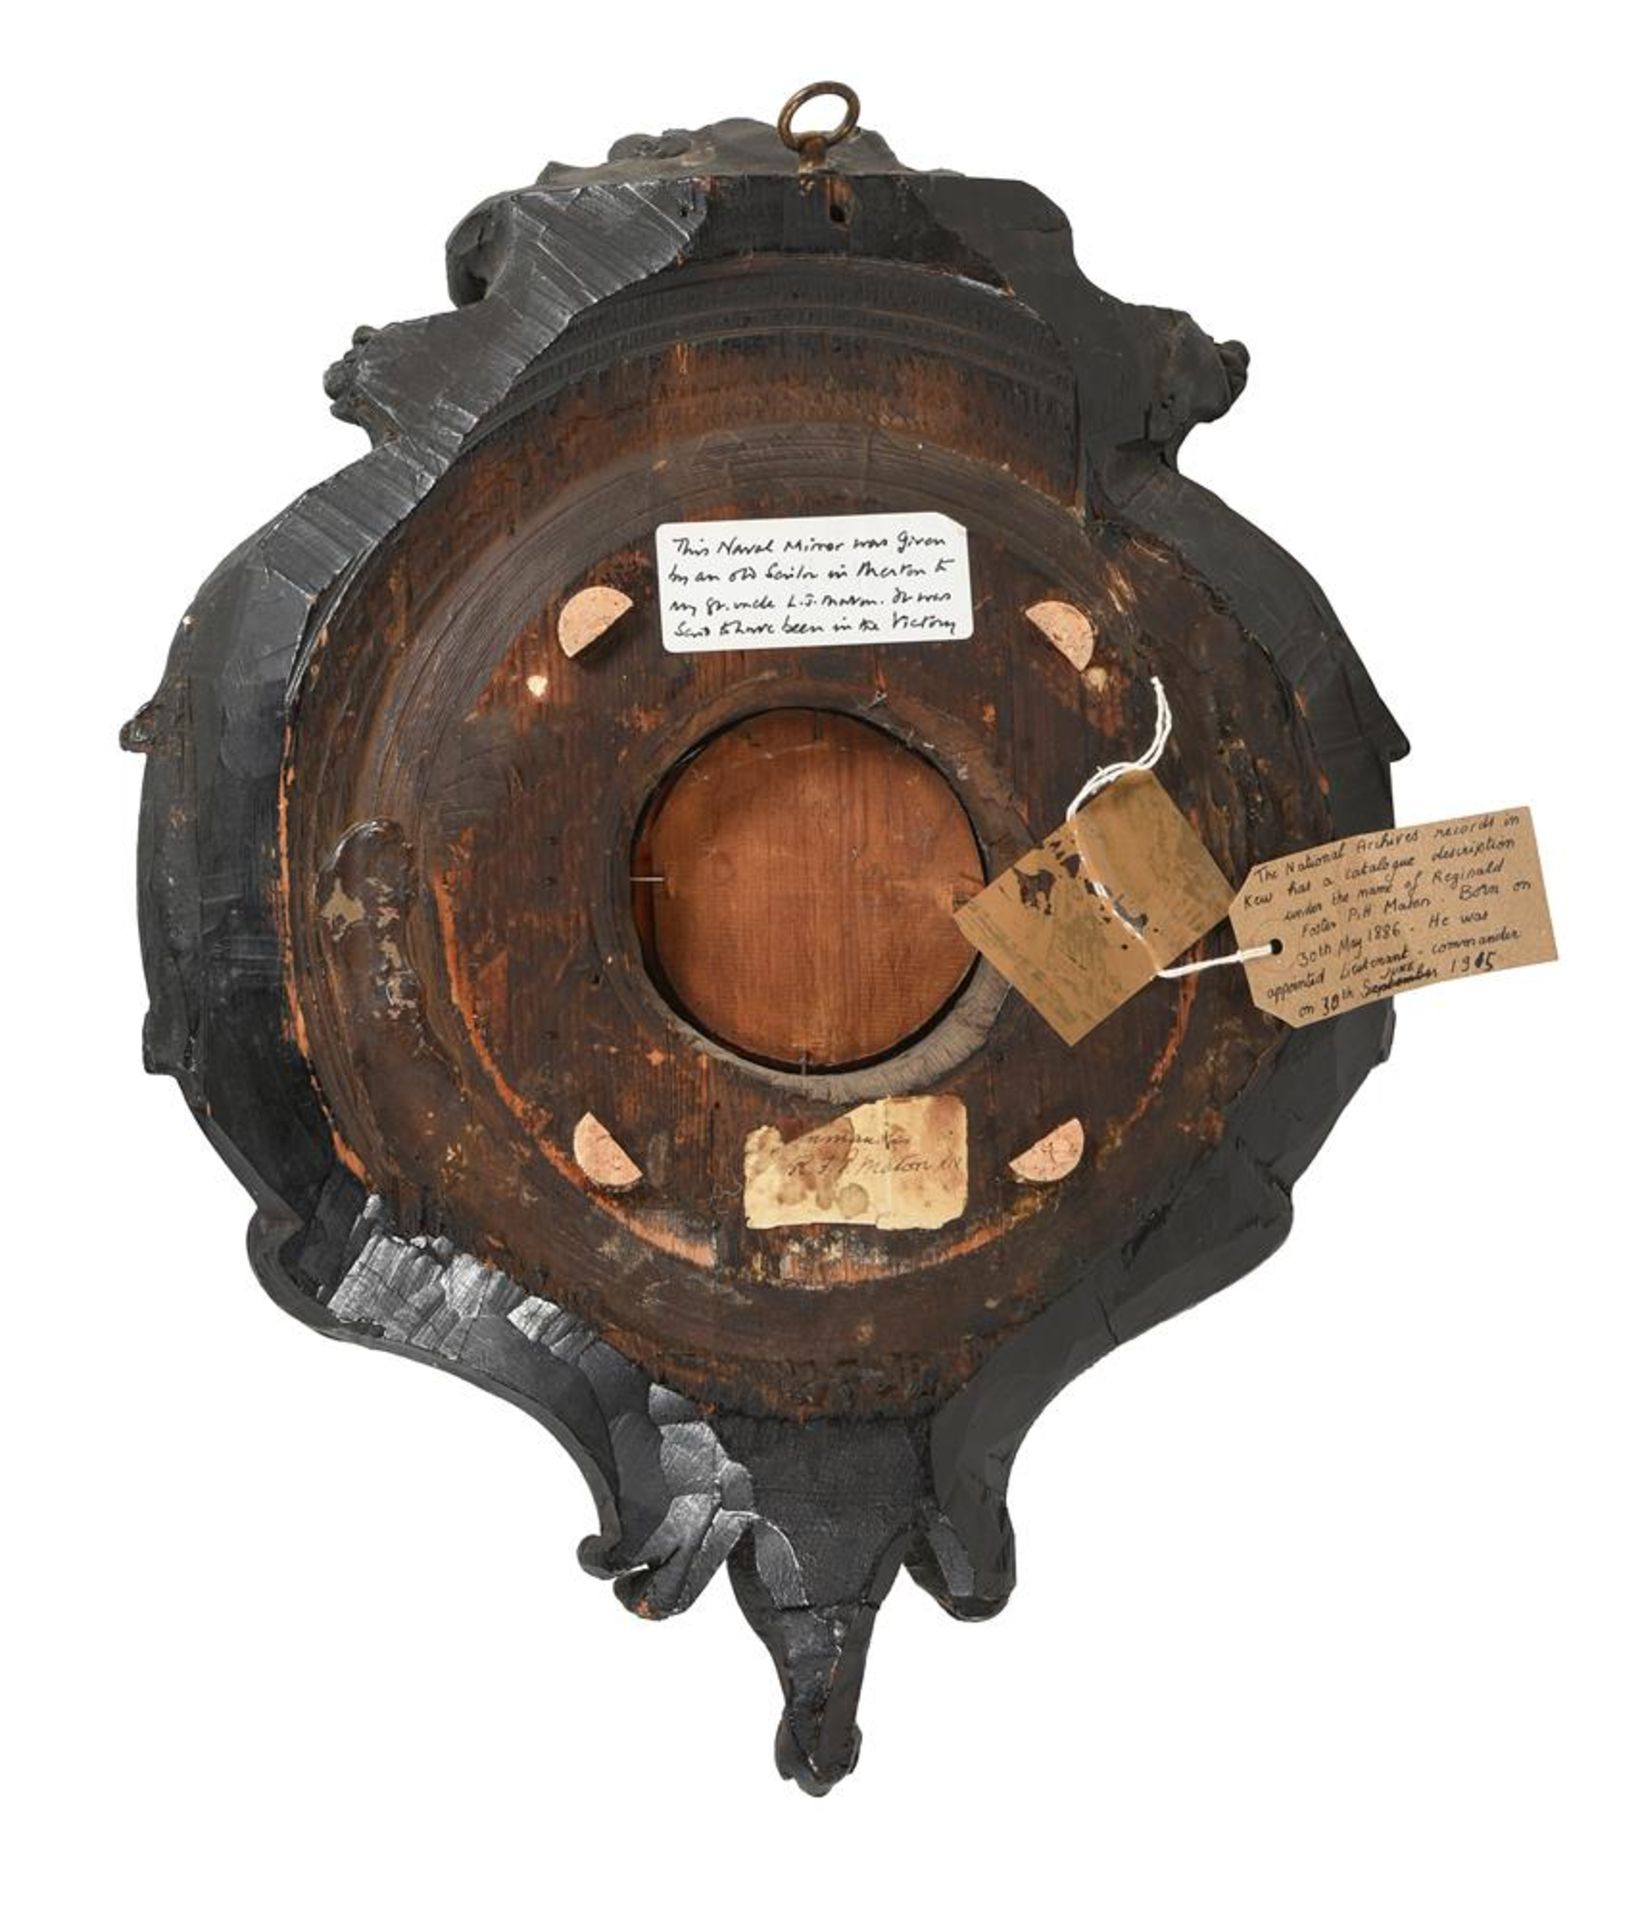 OF NAVAL INTEREST: A CARVED, EBONISED AND PARCEL GILT SHIP’S MIRROR, LATE 19TH OR EARLY 20TH CENTURY - Image 2 of 3